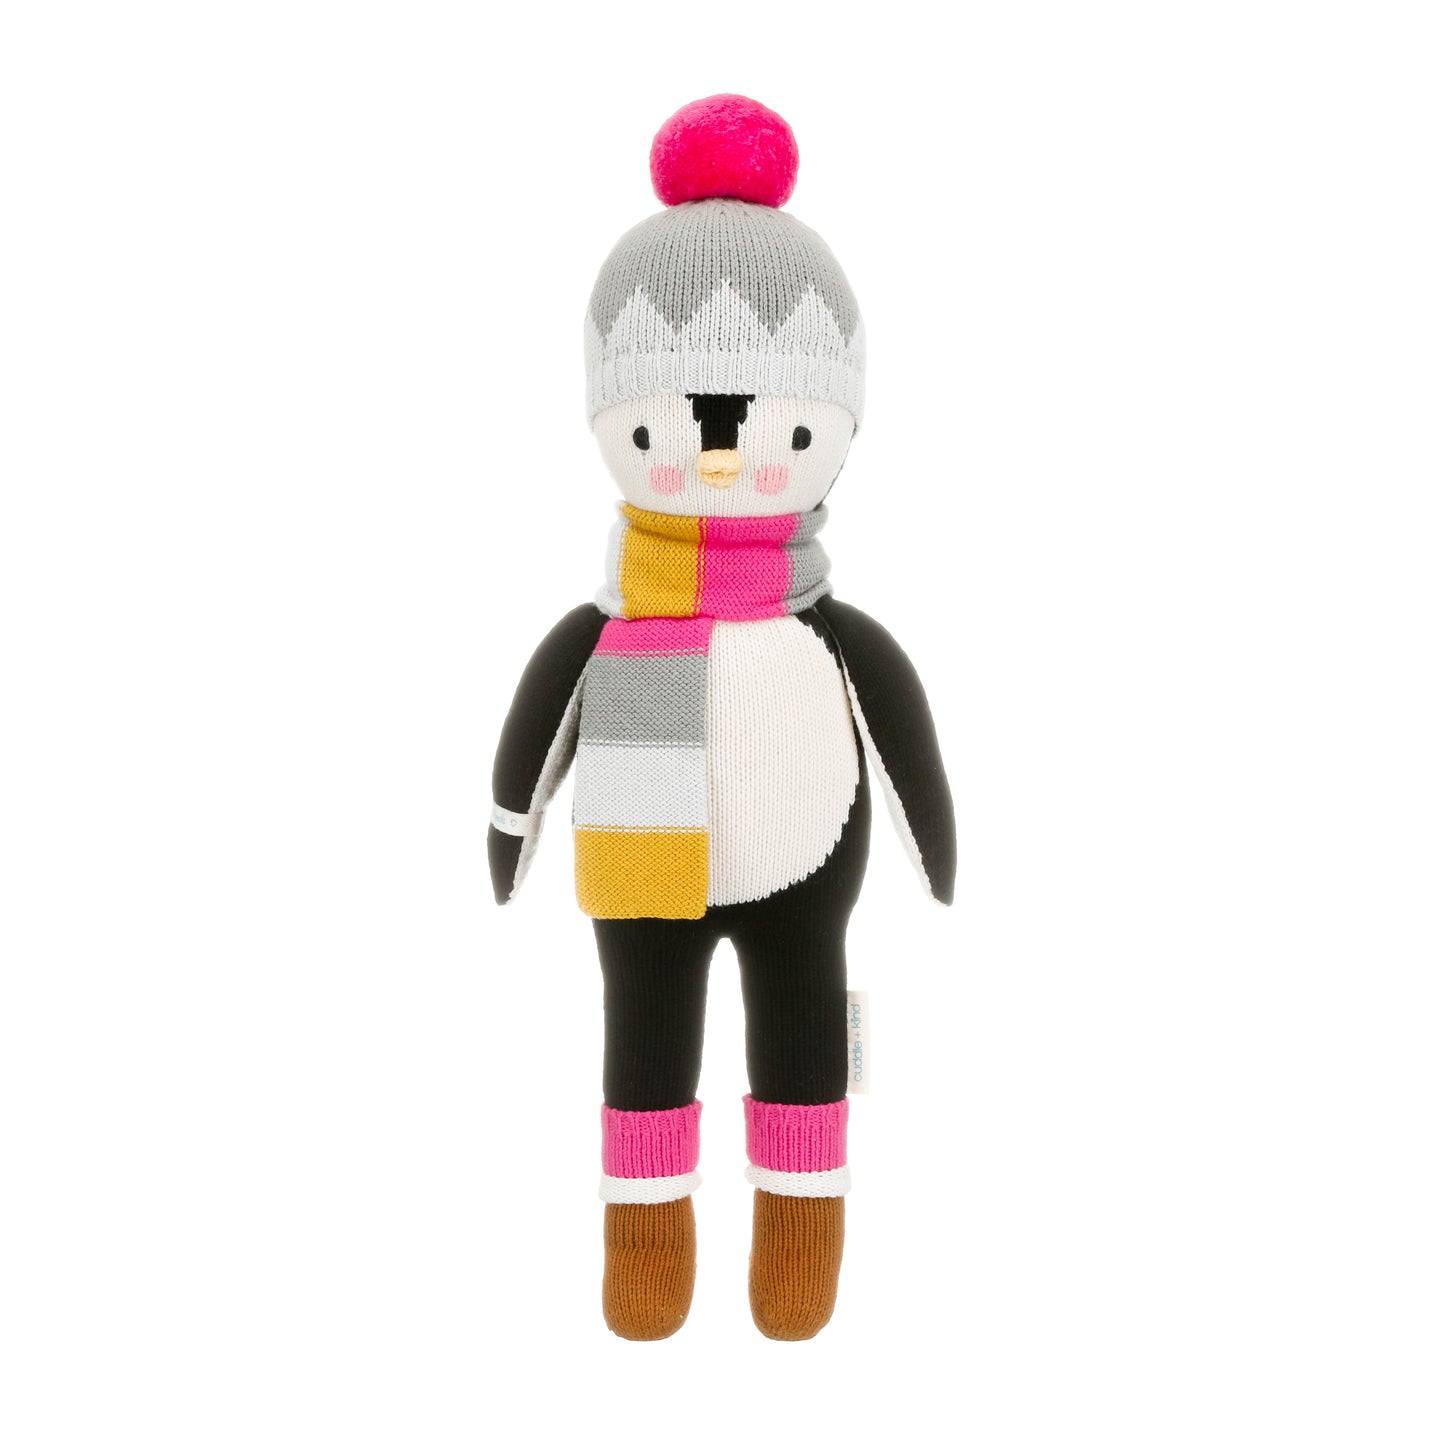 Aspen the penguin  shown from 360°. Aspen is wearing a striped pink, yellow, gray, and white scarf, a grey/gray hat with a pink pompom and brown and pink boots.